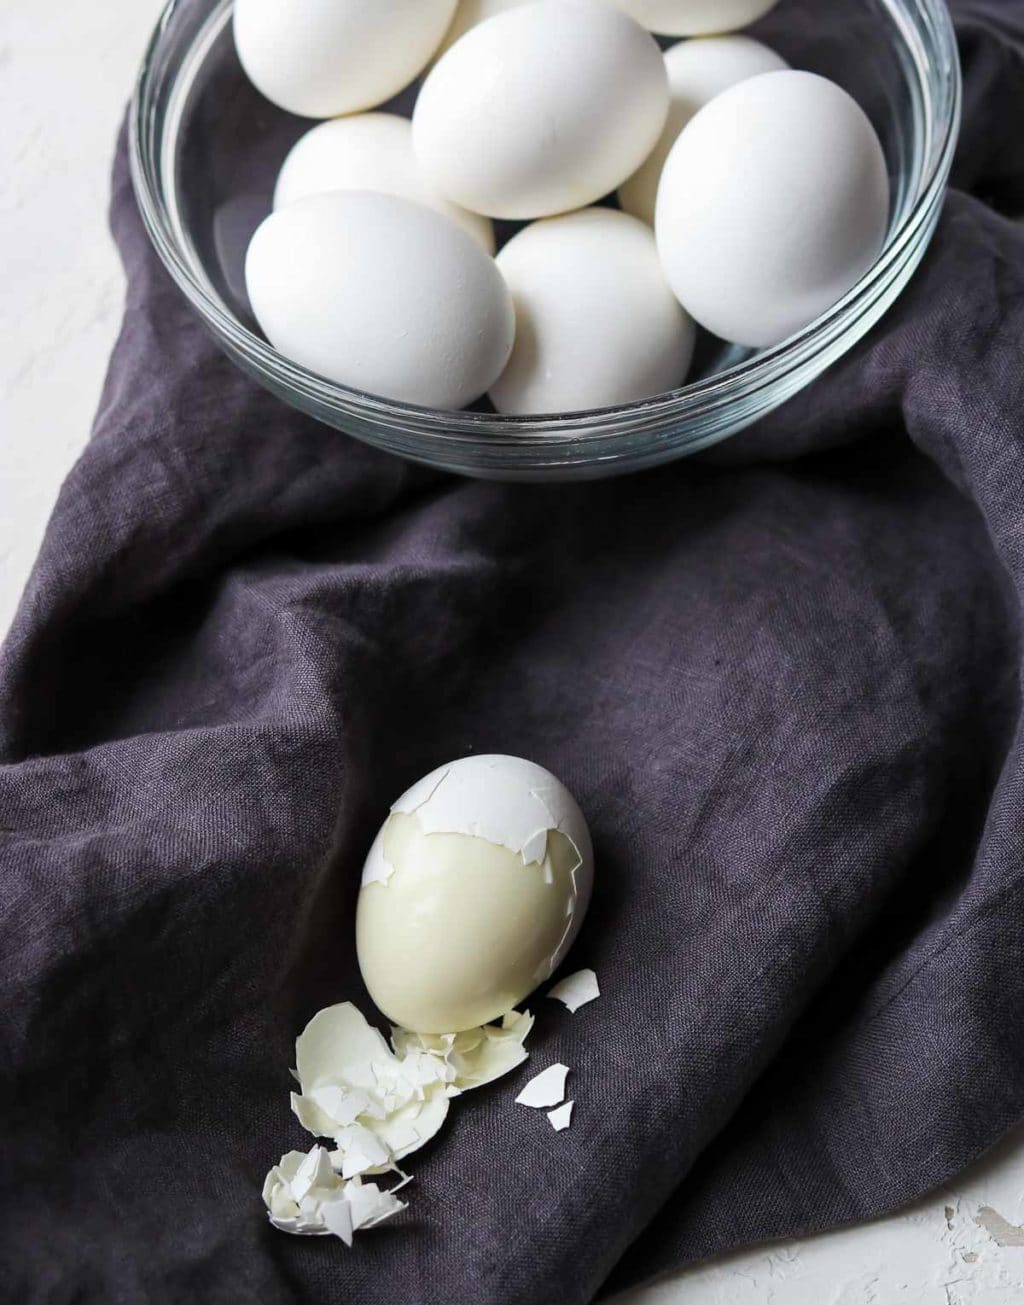 A bowl of hard boiled eggs cooked in the instant pot and one egg half peeled